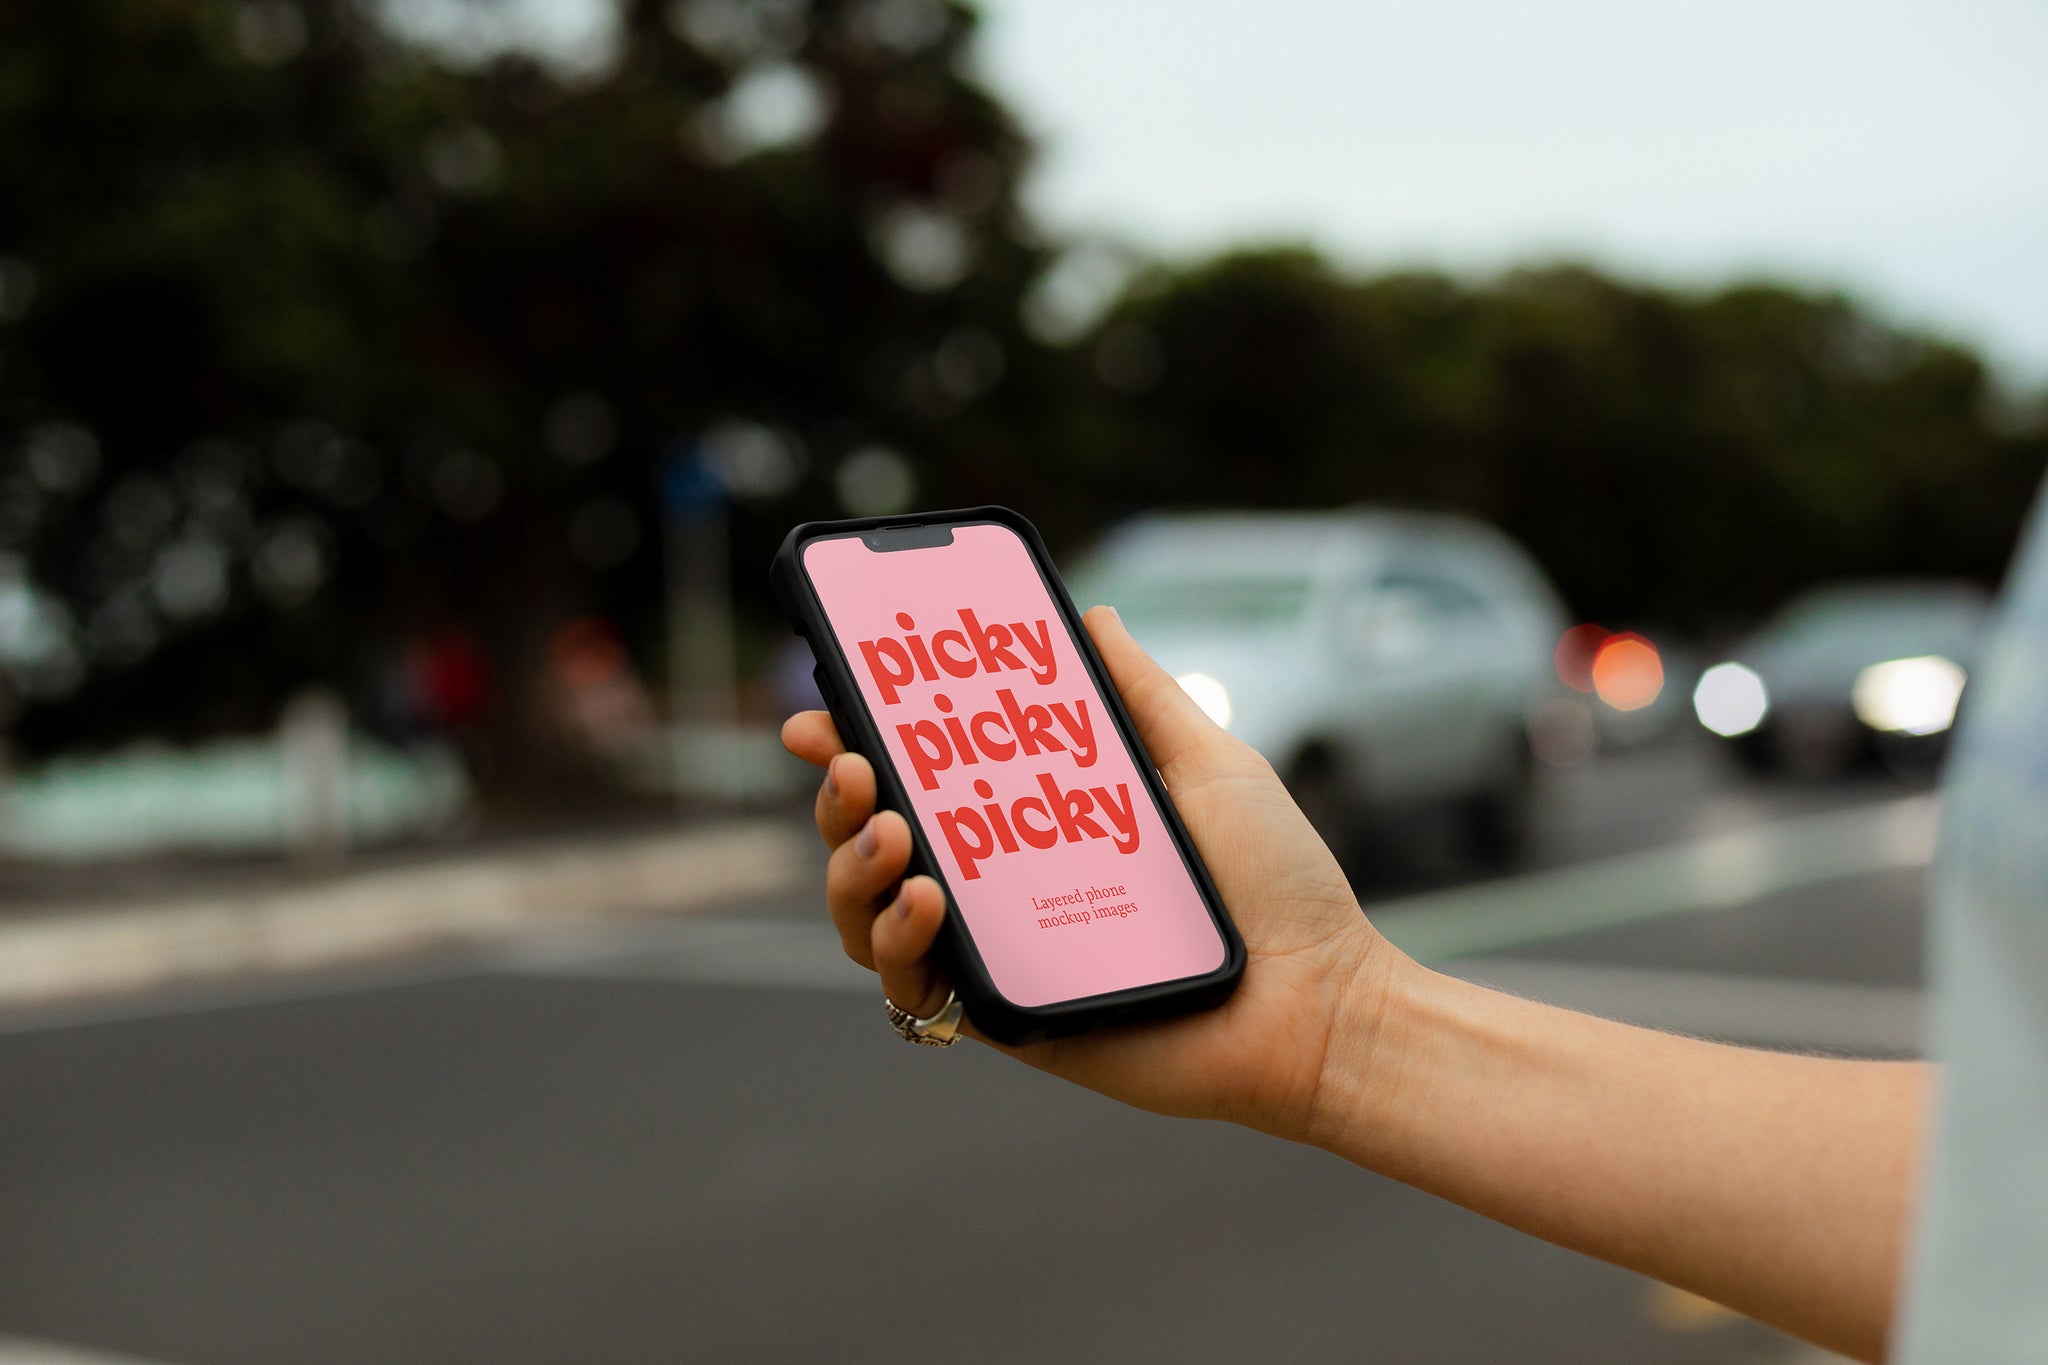 Man holding smart phone, iphone at traffic light crossing. Holding phone out, body cropped. Cars with headlights visible. Bright pink screen with the words 'picky' written three times in red down the phone screen. 